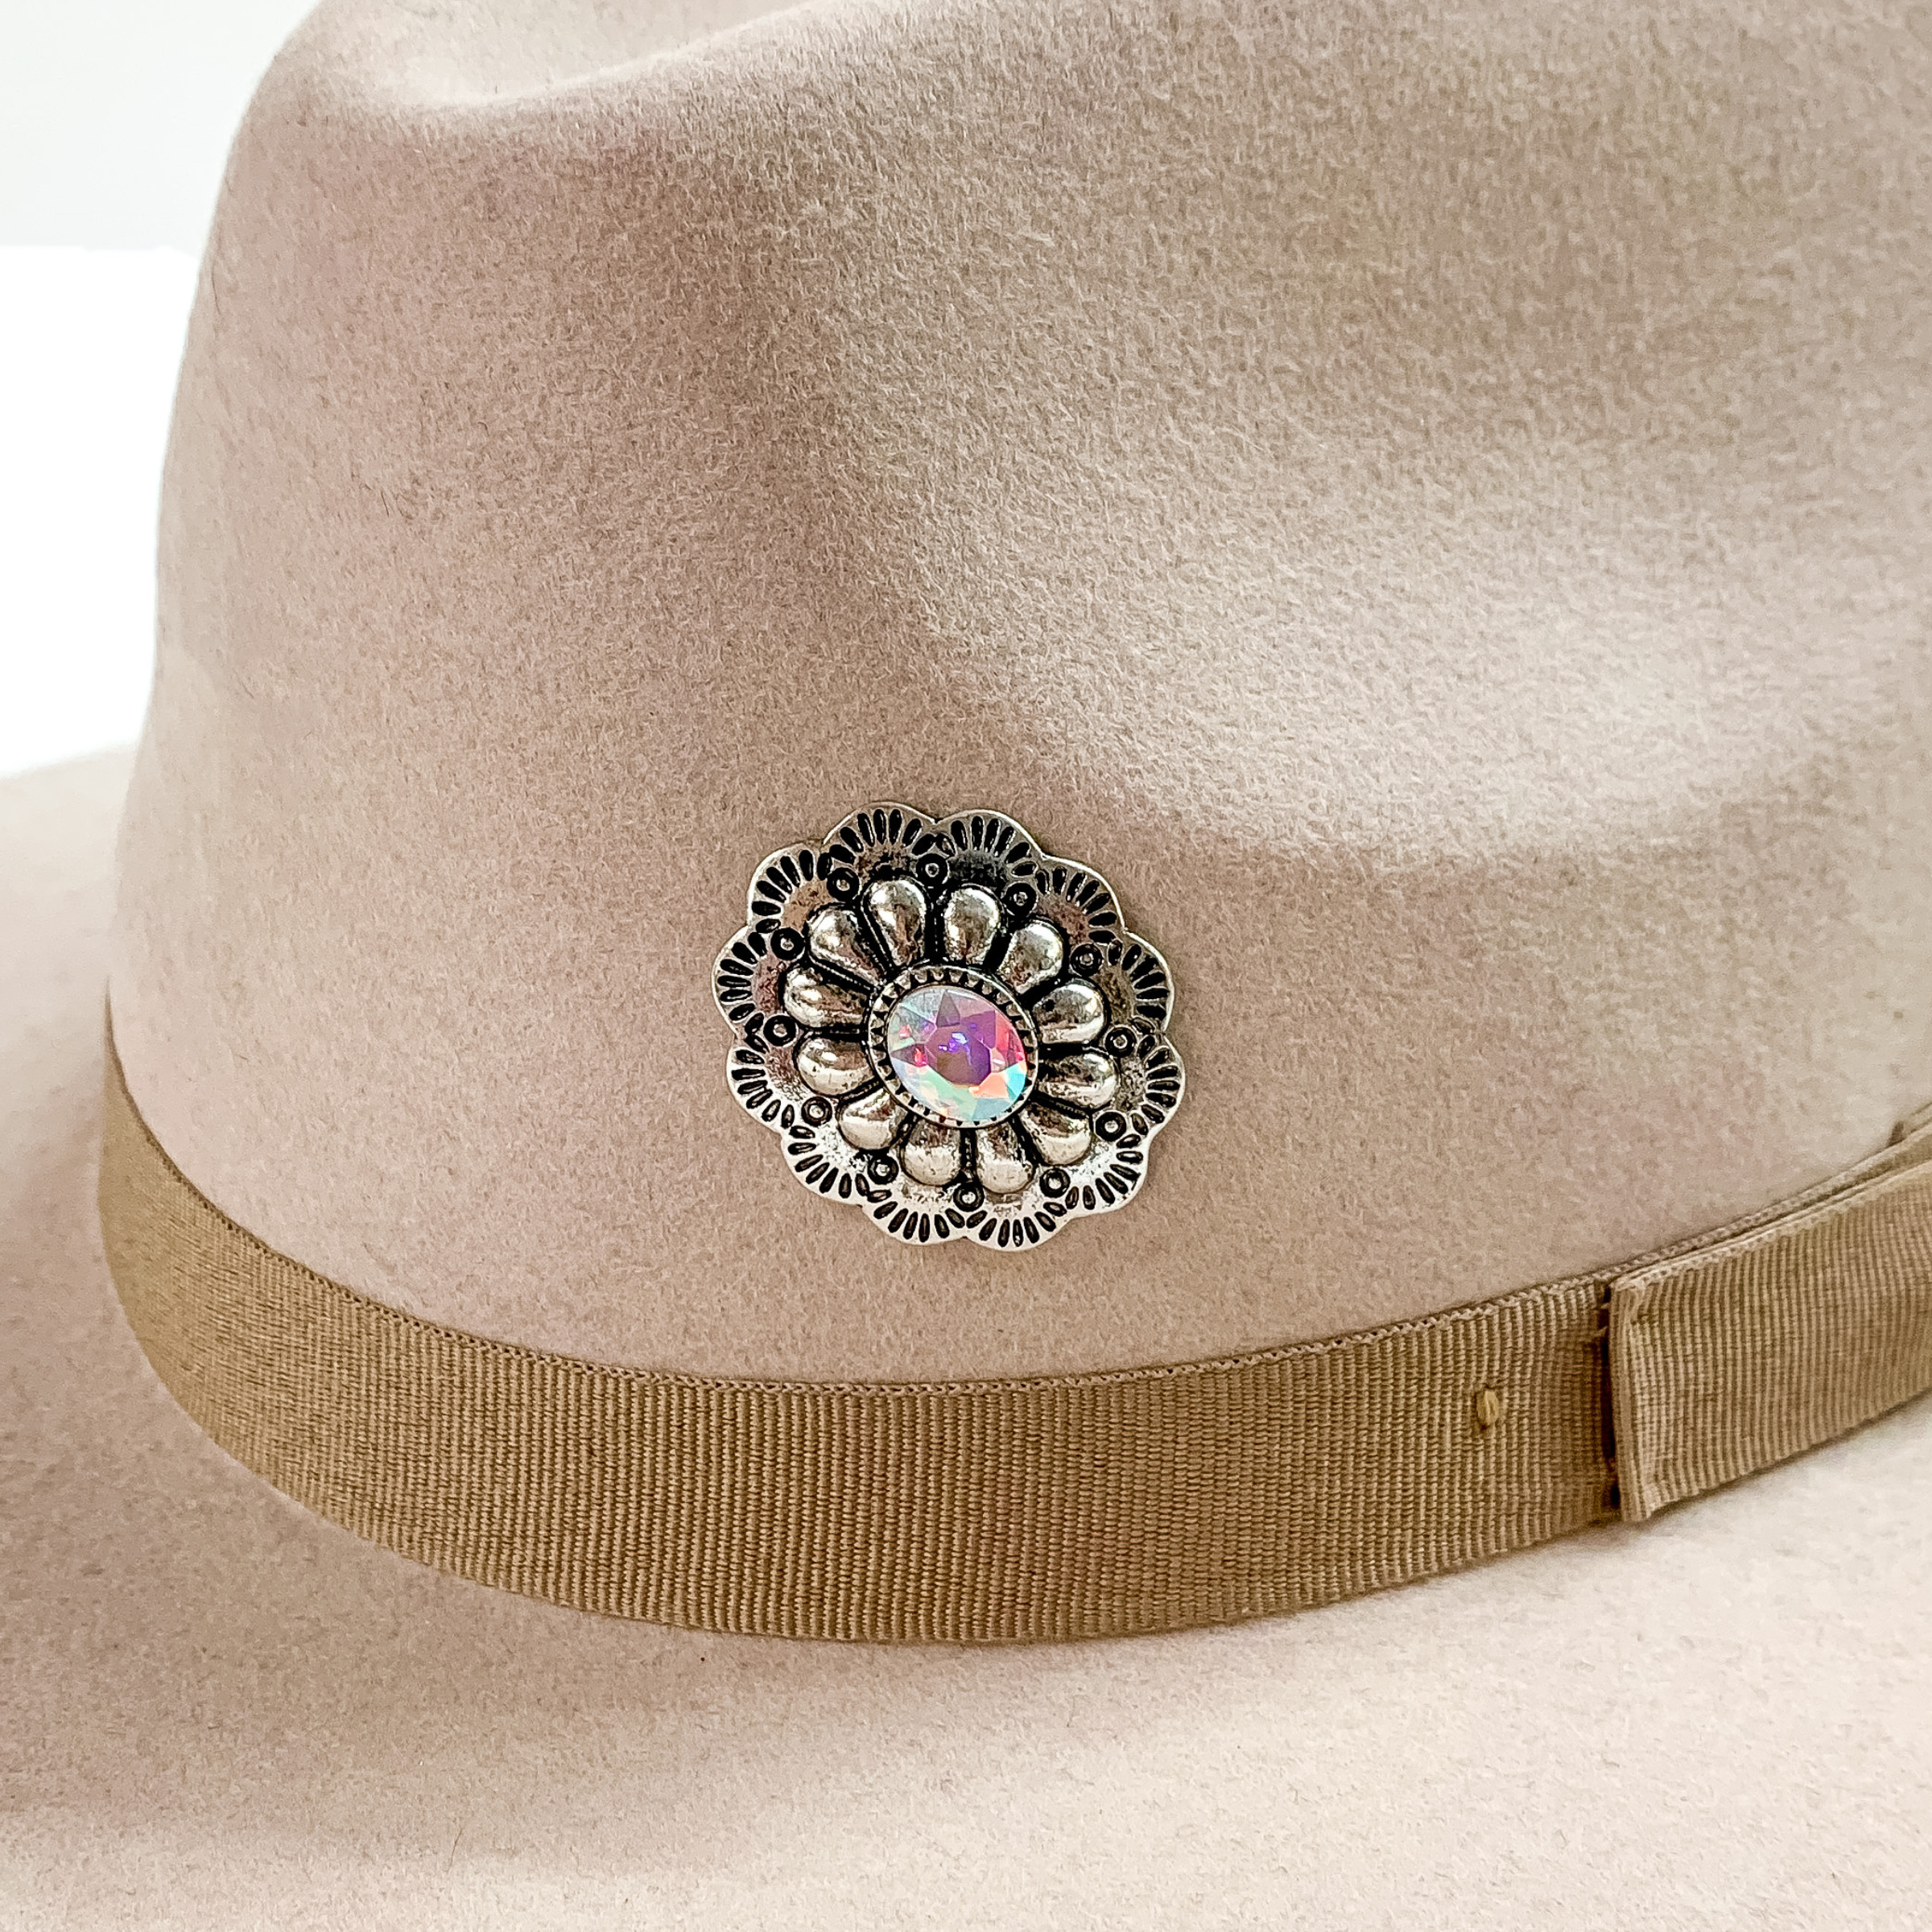 Oval concho hat pin in silver with a center ab crystal pictured on a beige colored hat pictured on a white background.